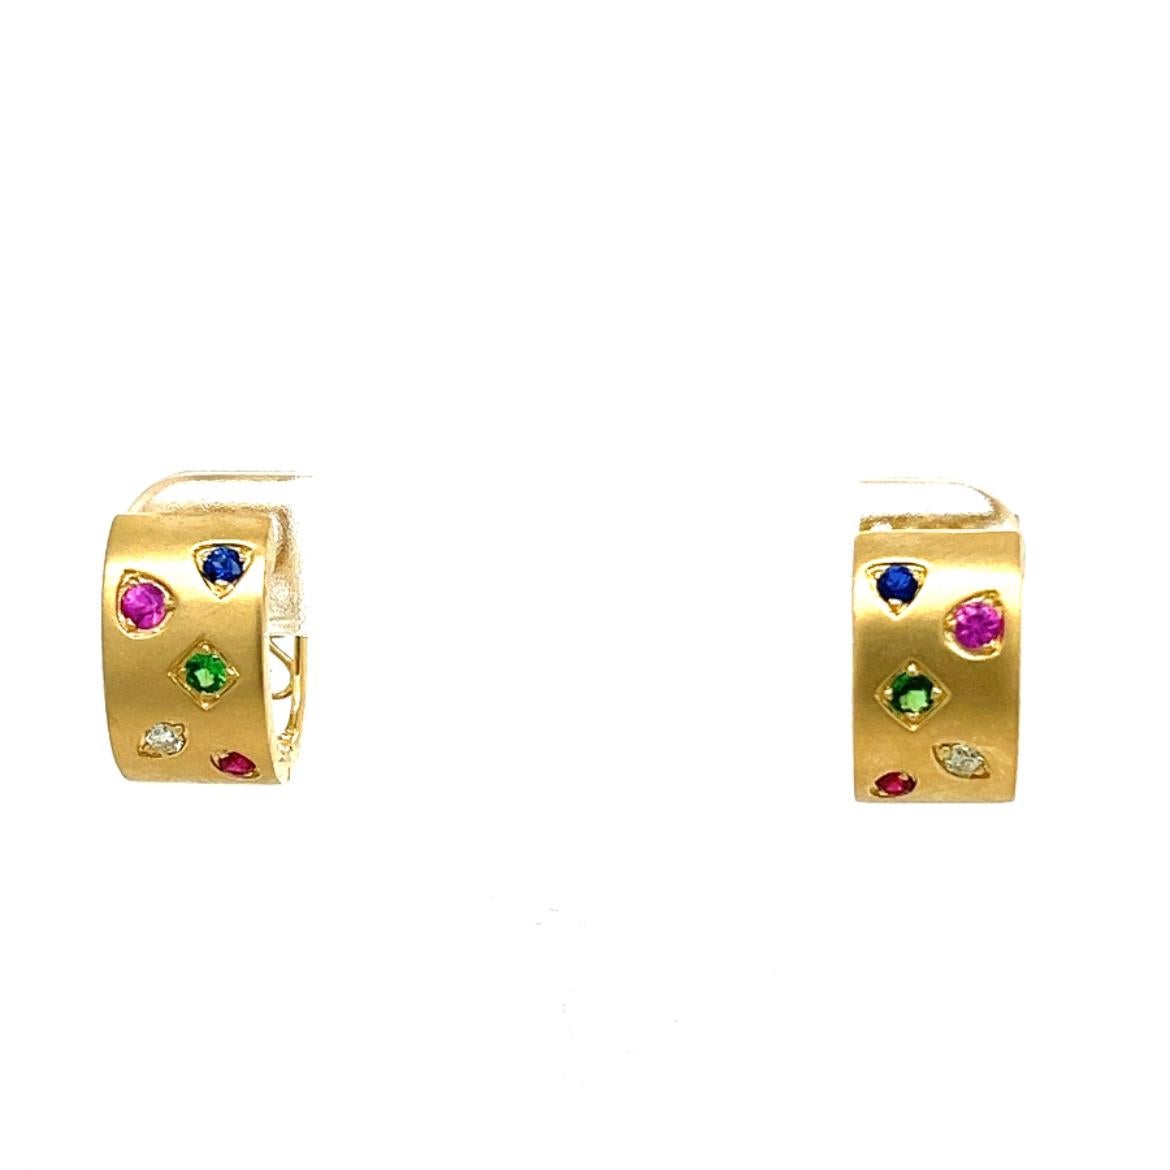 18K Yellow Gold Earrings with Multi-Color Gemstones and Diamonds
2 Blue Sapphires - 0.08 CT
2 Diamonds - 0.05 CT
2 Green Garnets - 0.10 CT
2 Pink Sapphires - 0.11 CT
2 Rubies - 0.05 CT
18K Yellow Gold - 6.36 GM
The artisans and designers at Althoff